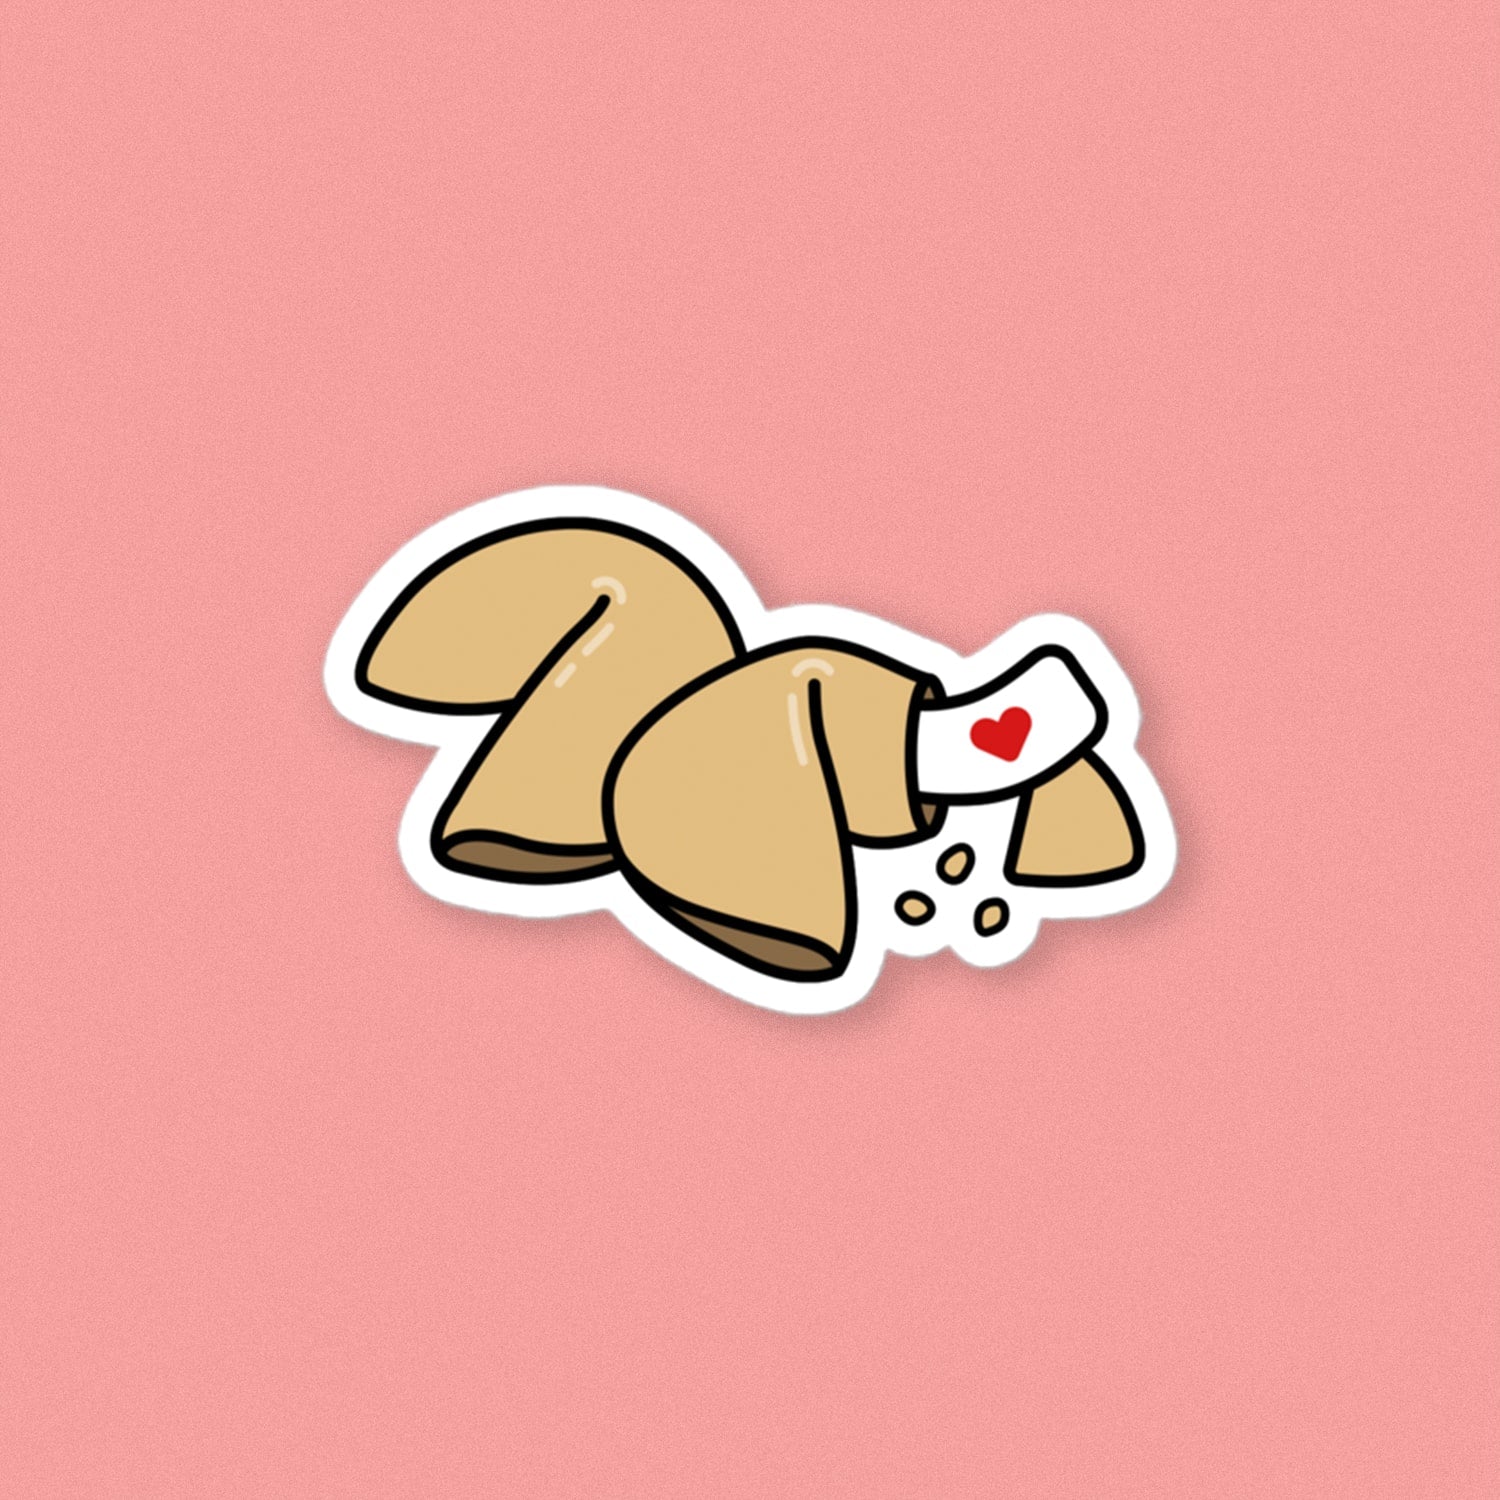 Fortune Cookie Vinyl Sticker - Ni De Mama Chinese Clothing